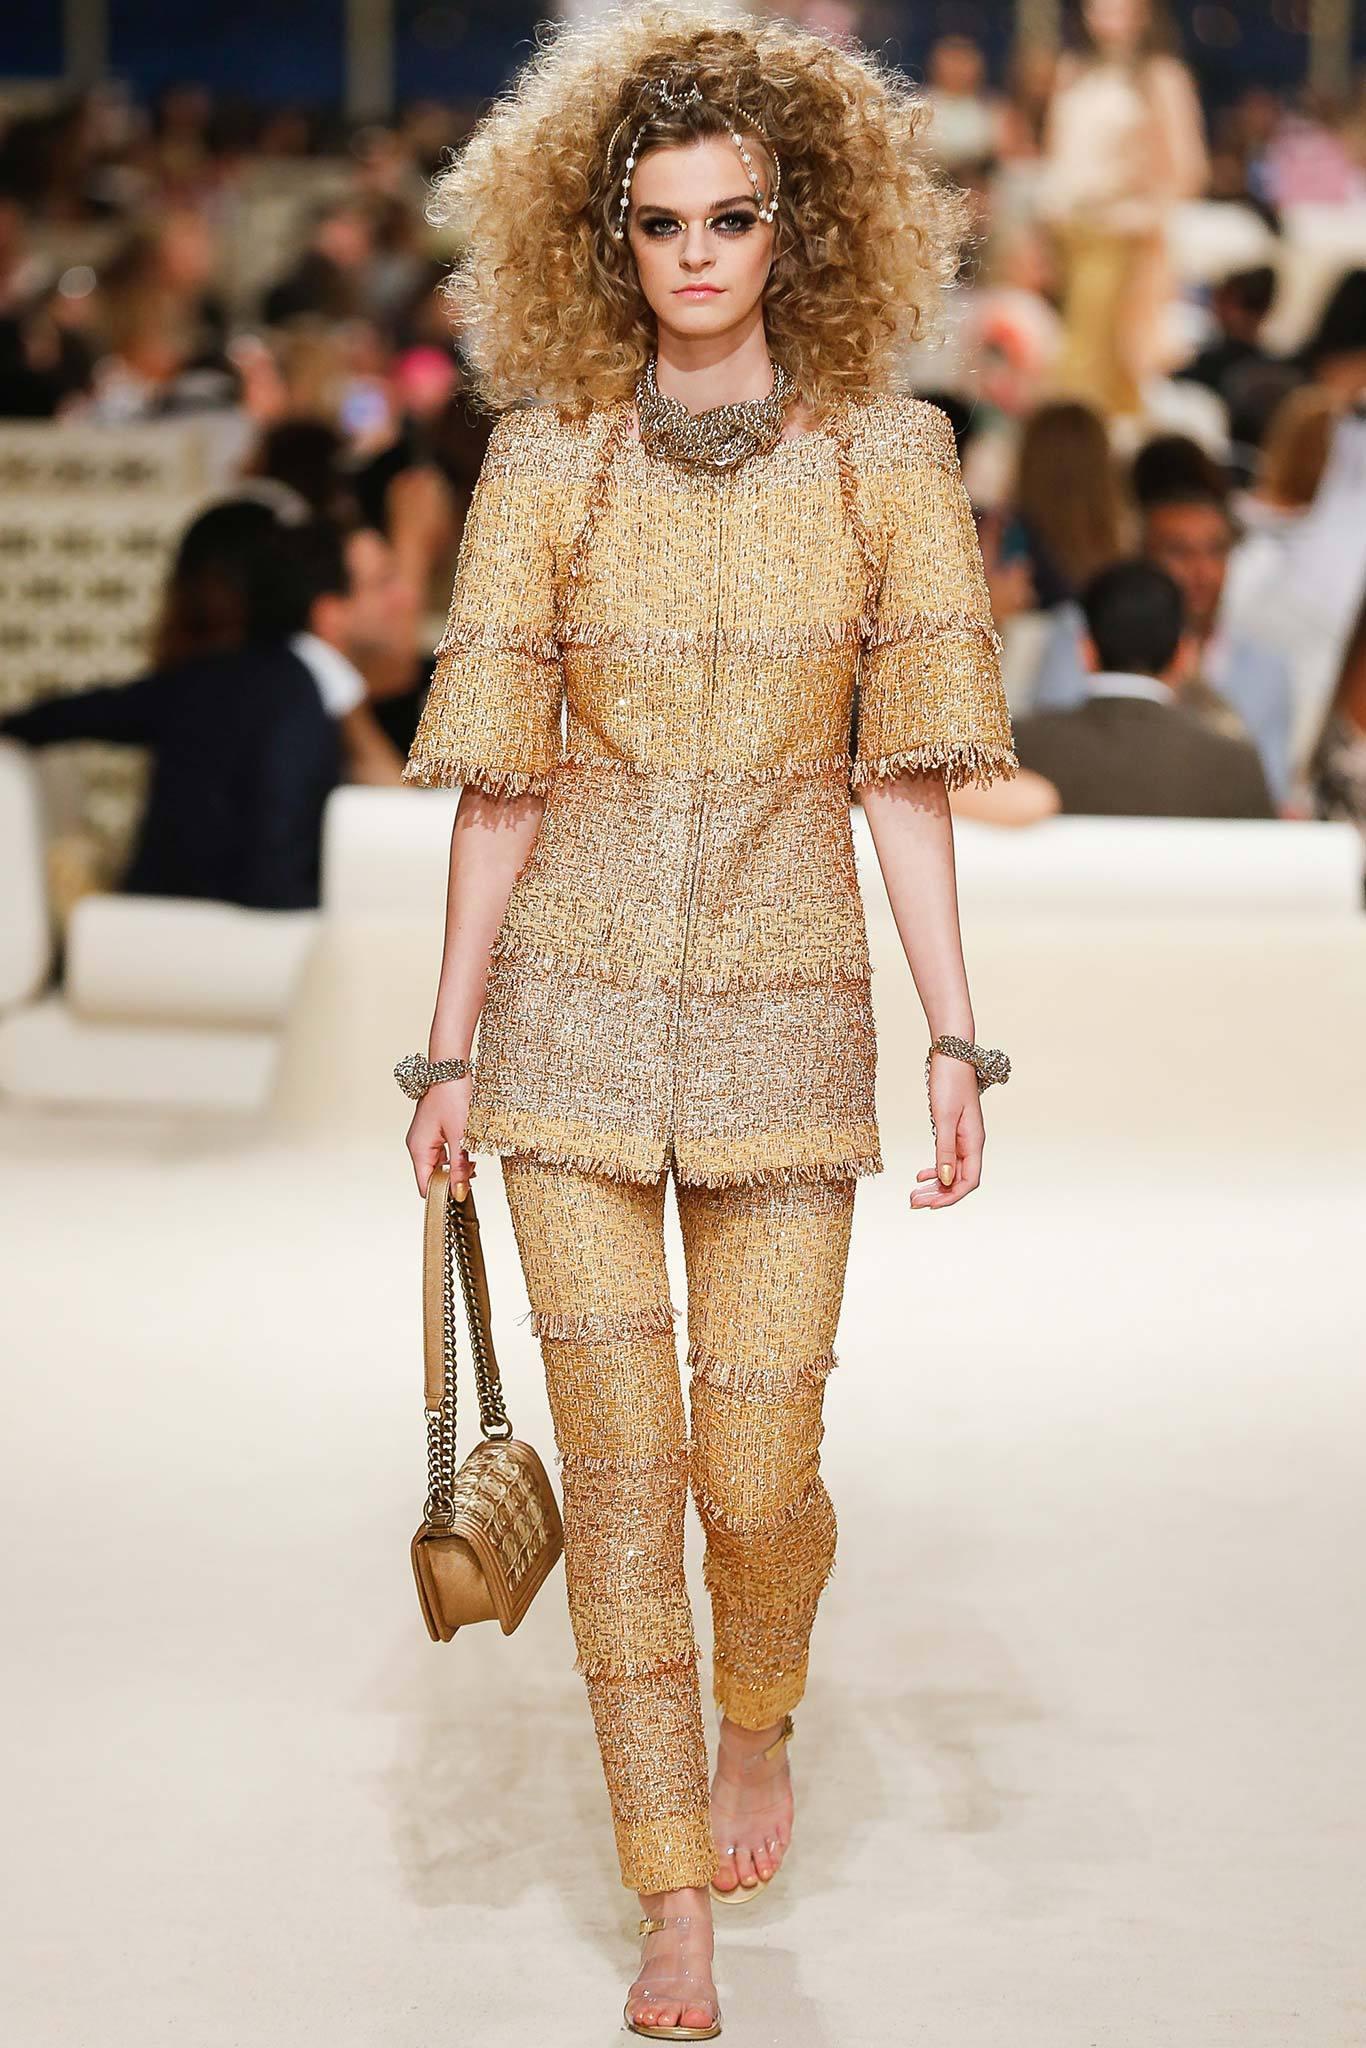 Stunning Chanel Runway suit : ribbon tweed pants and knit vest : from Paris / DUBAI Cruise Collection, 2015 Cruise, 15C
Boutique price of pants only was over 5,200$
Condition: never worn, pants come with tag, vest never worn too
Size mark 42